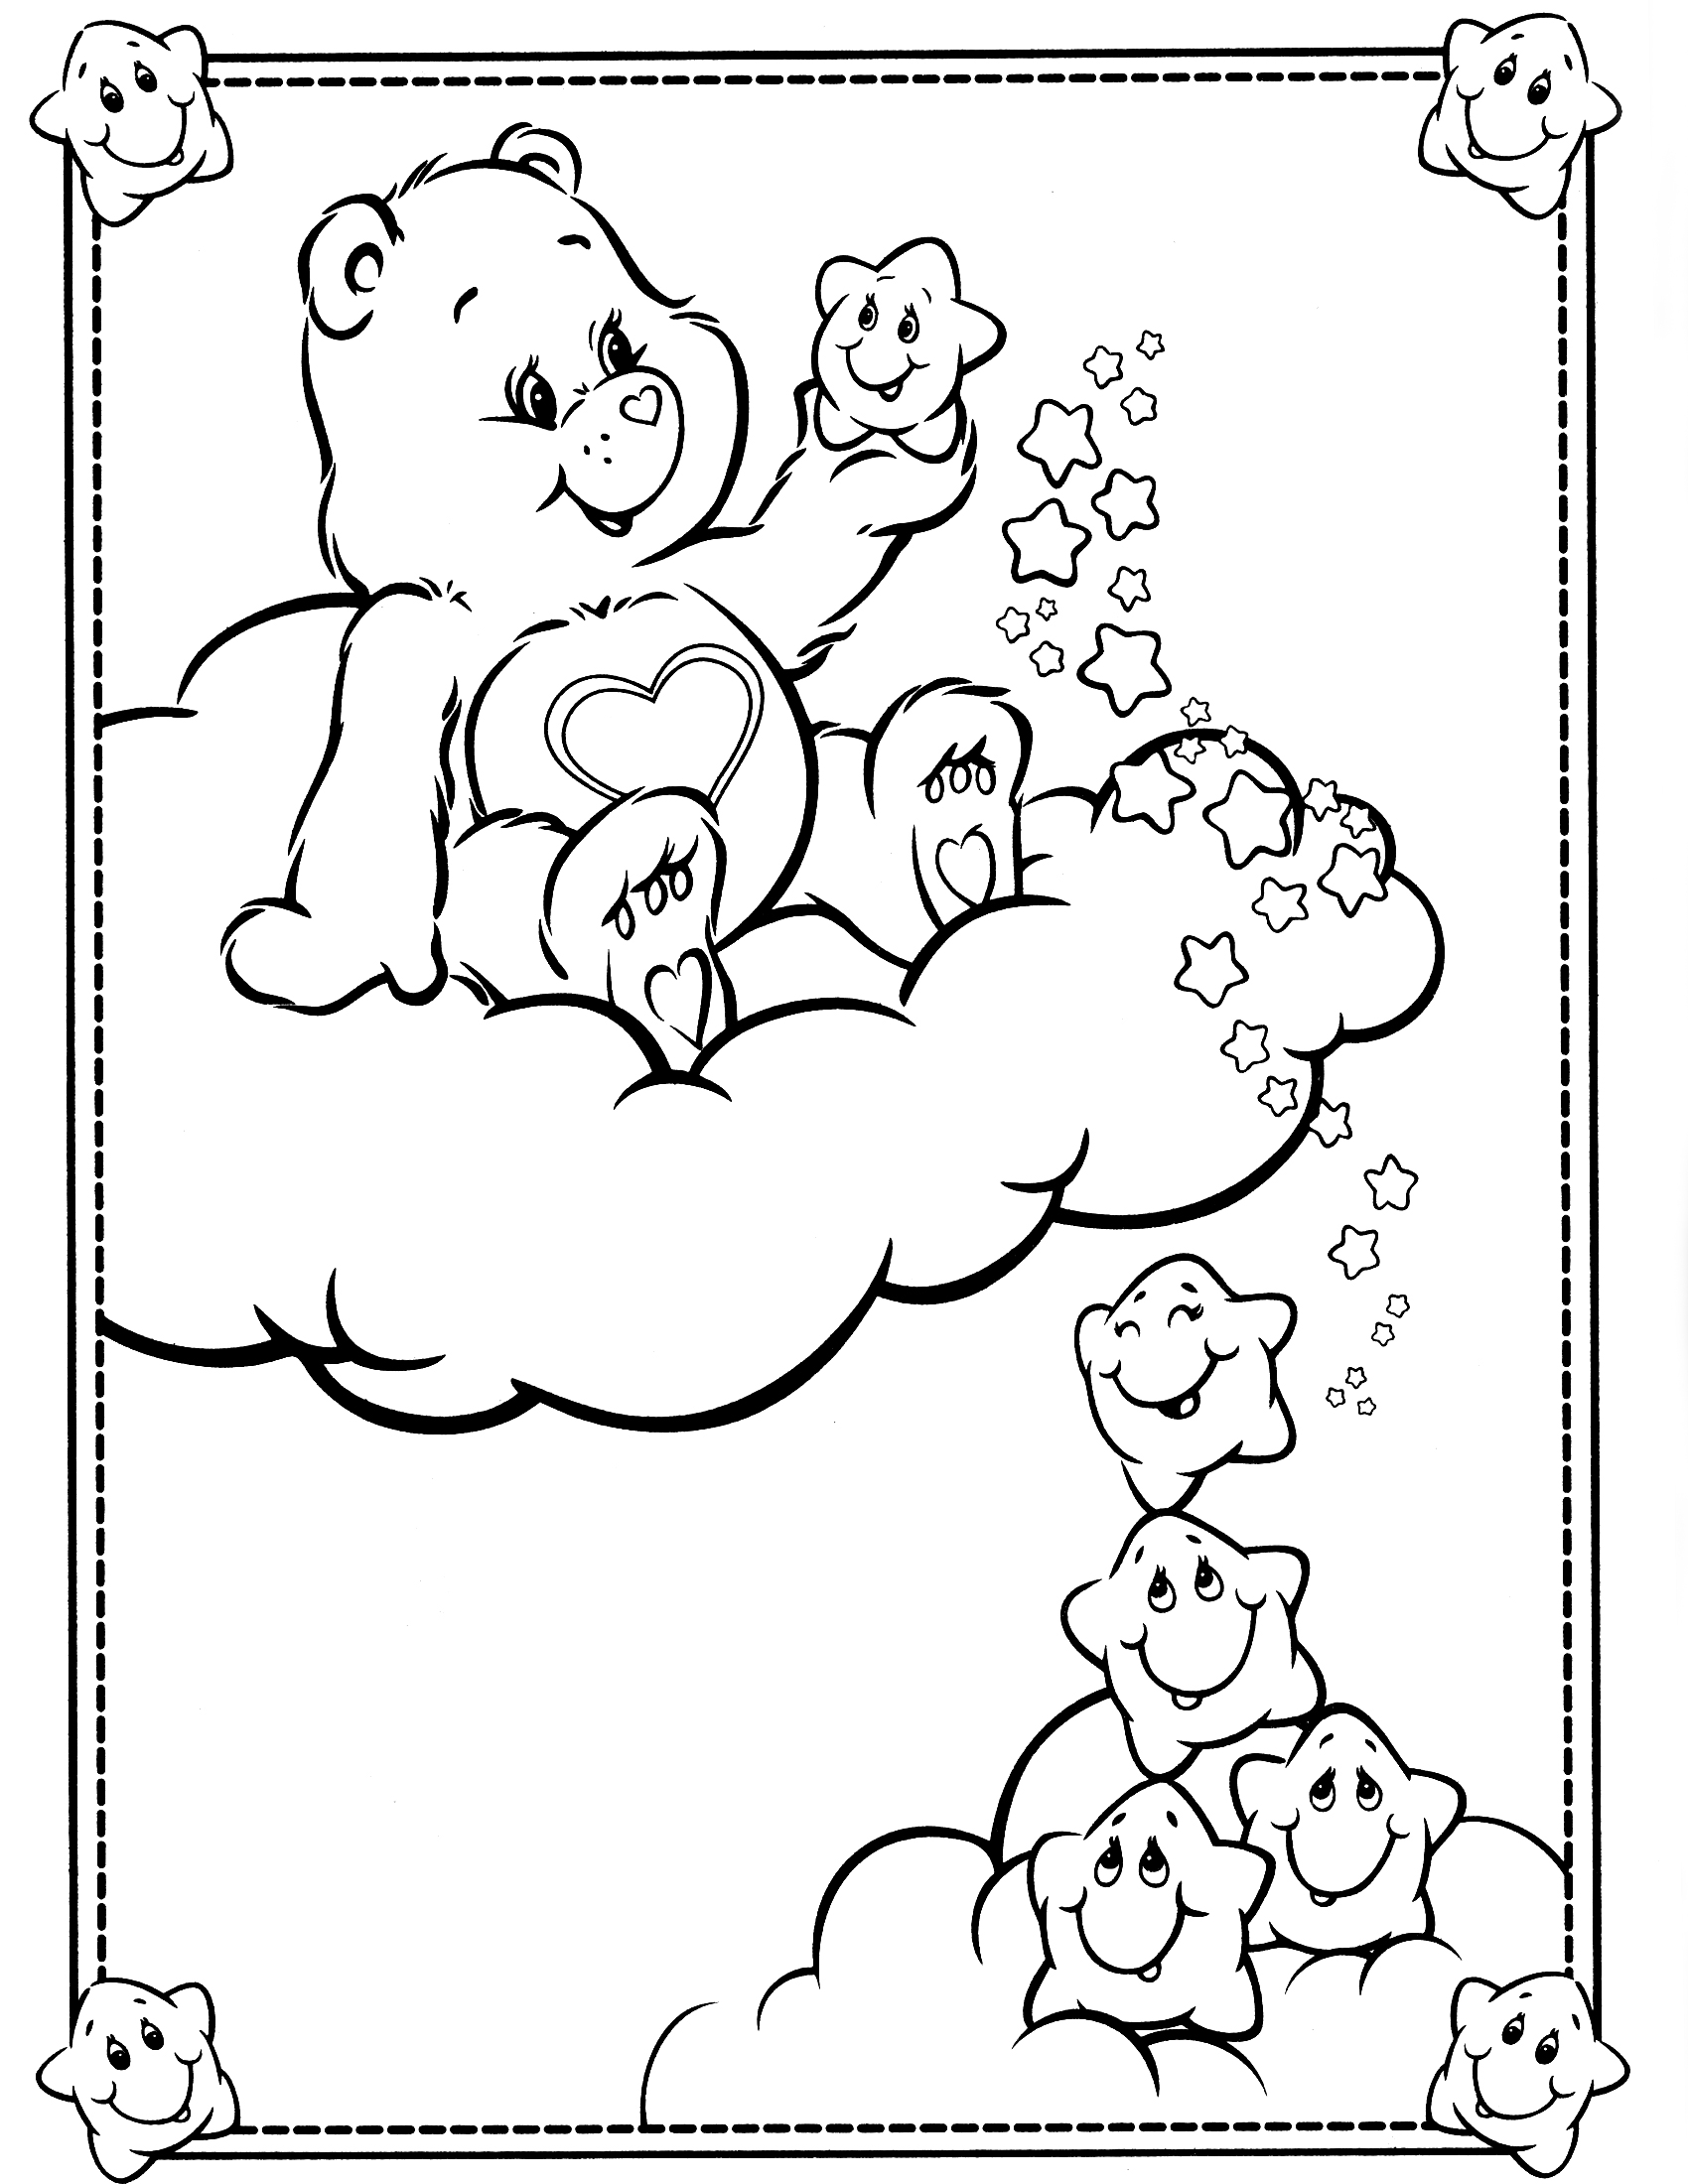 Drawing Care Bears 37230 (Cartoons) Printable coloring pages